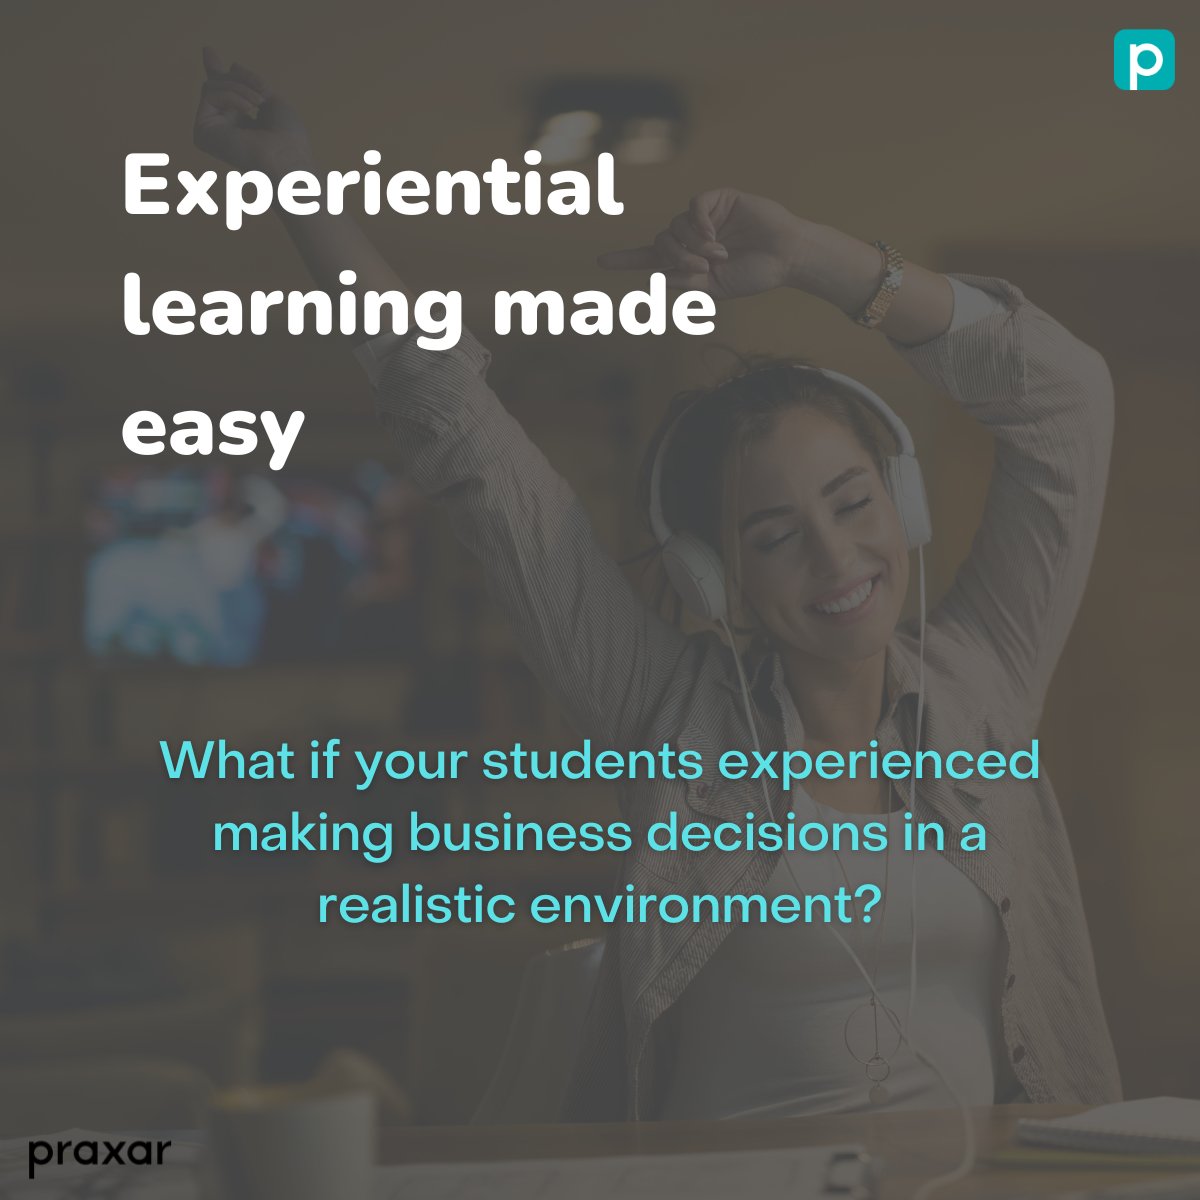 Praxar's business simulations offer an innovative way for business students to learn. 🚀

Let us help you enhance your course and give your students the skills they need to succeed in the business world! 💼

Our sims 🔗 bit.ly/3xHrUGP

#businesssimulations #edtech